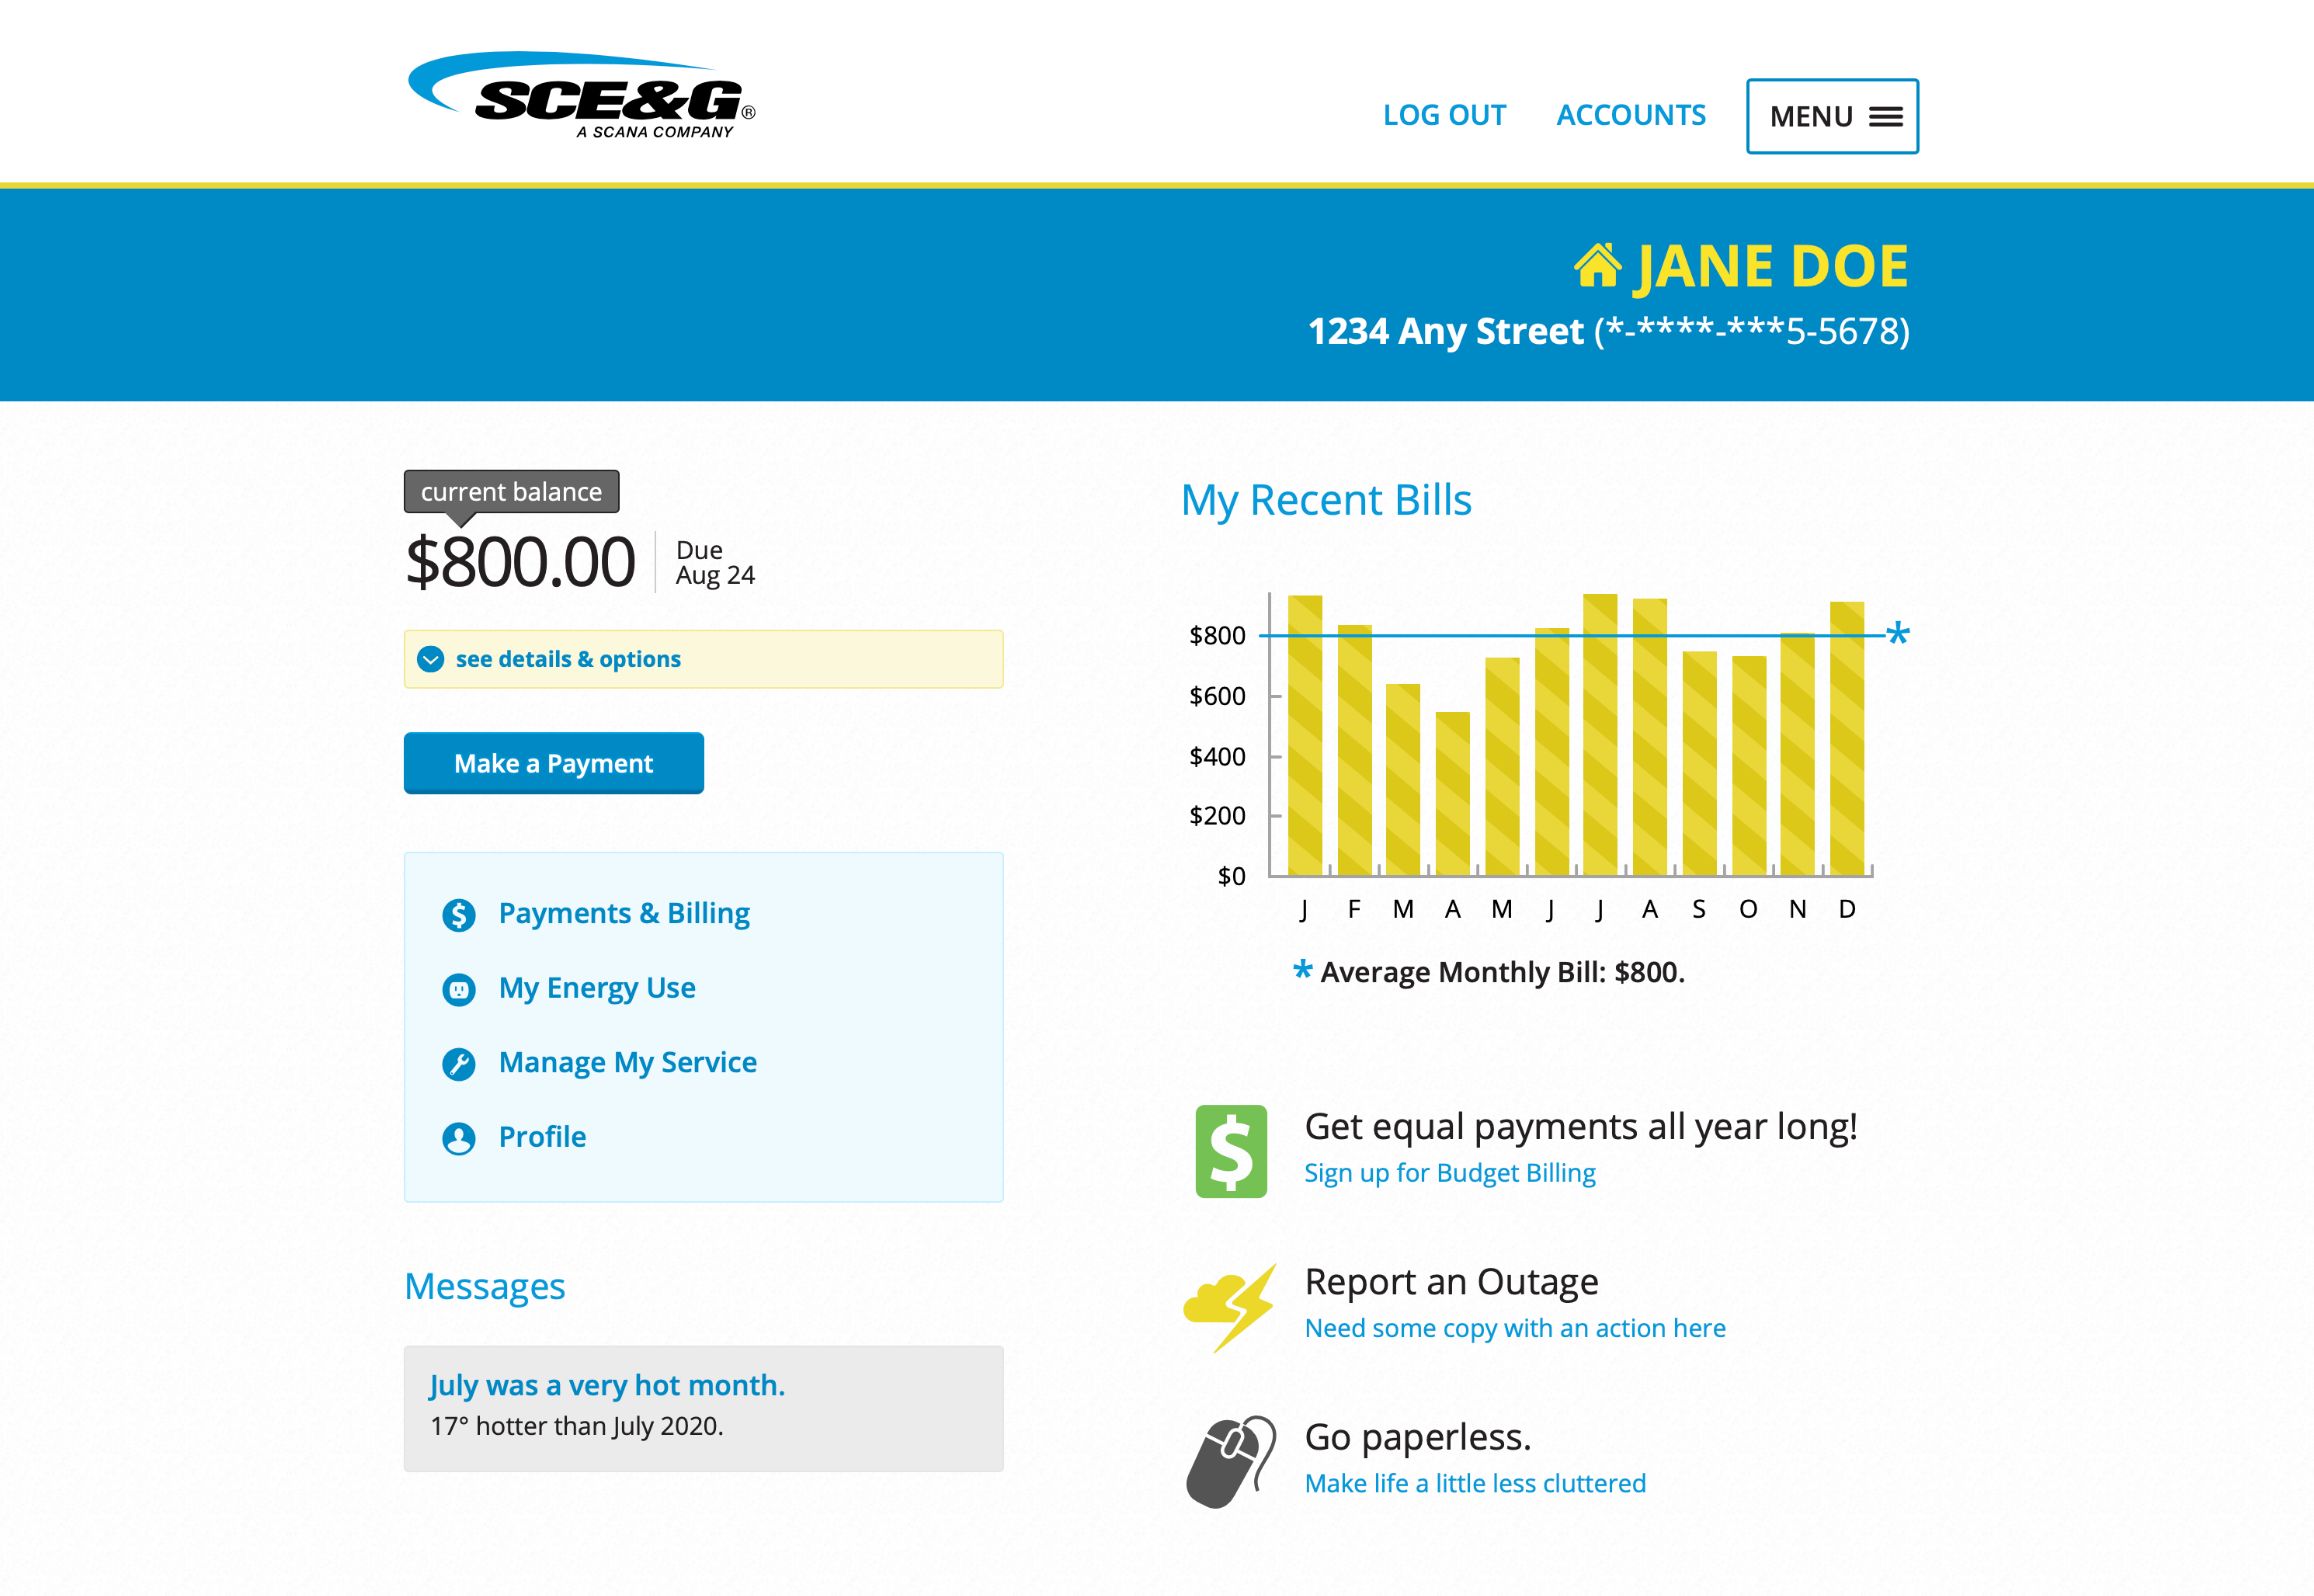 SCE&G (Scana) landing page. Customer name and account information is prominently displayed at the top of the screen on a blue background. Below, the current balance, recent bills and averages, messages, and quick links.